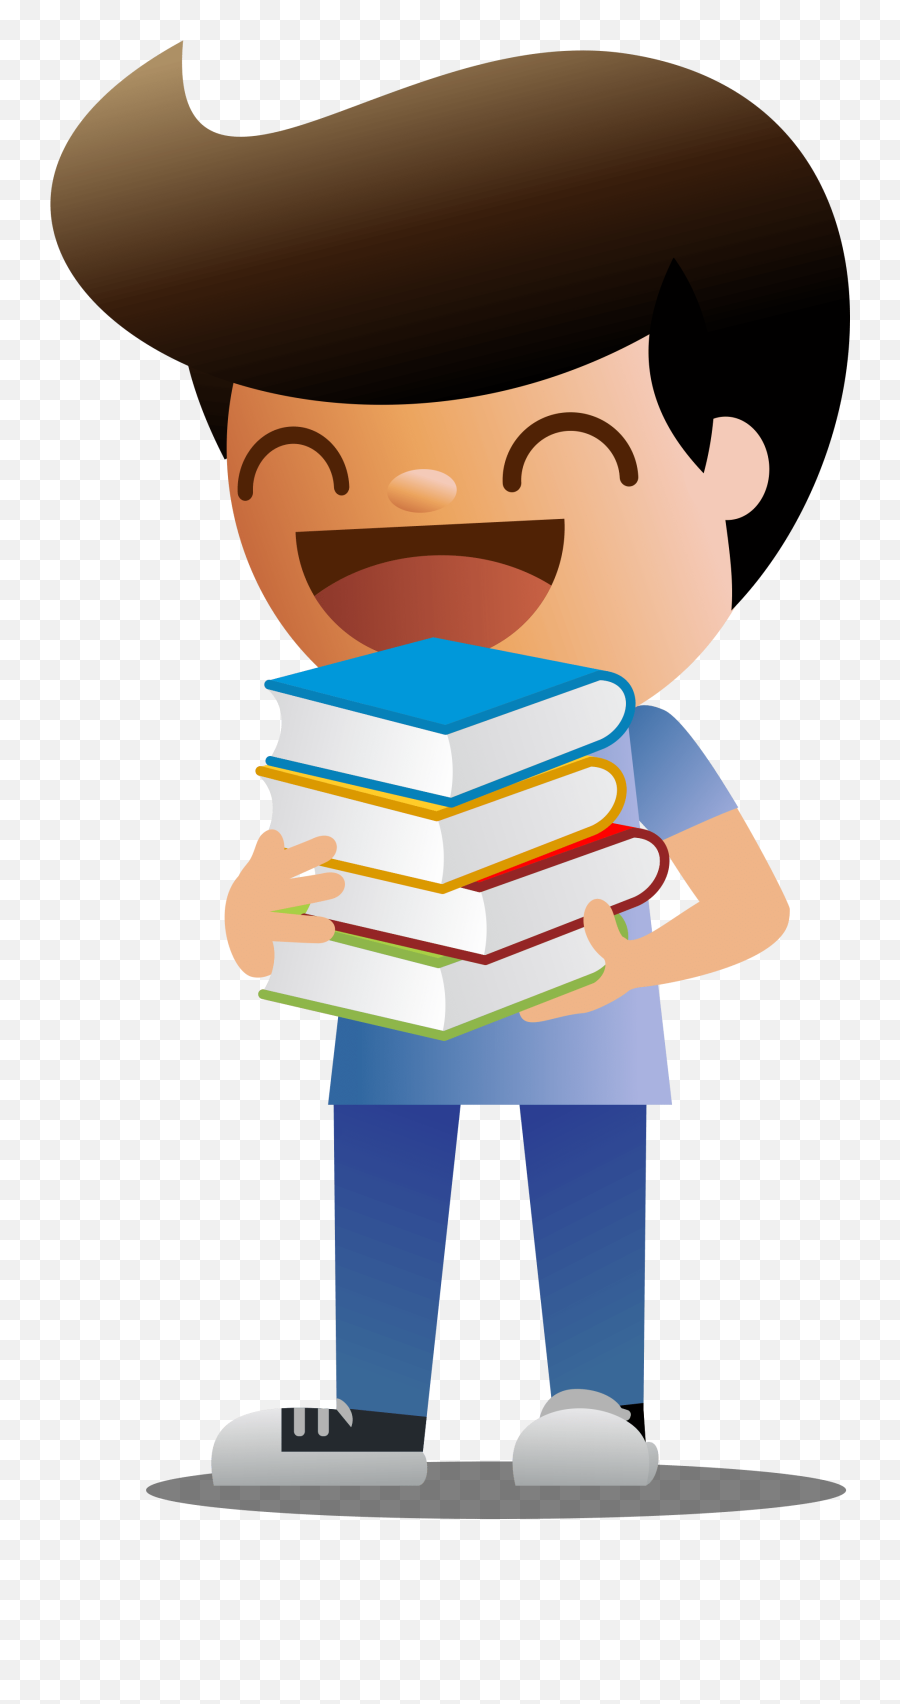 Learn Spanish For Kids - Top 20 Important Words Happy Emoji,Emojis Librospng